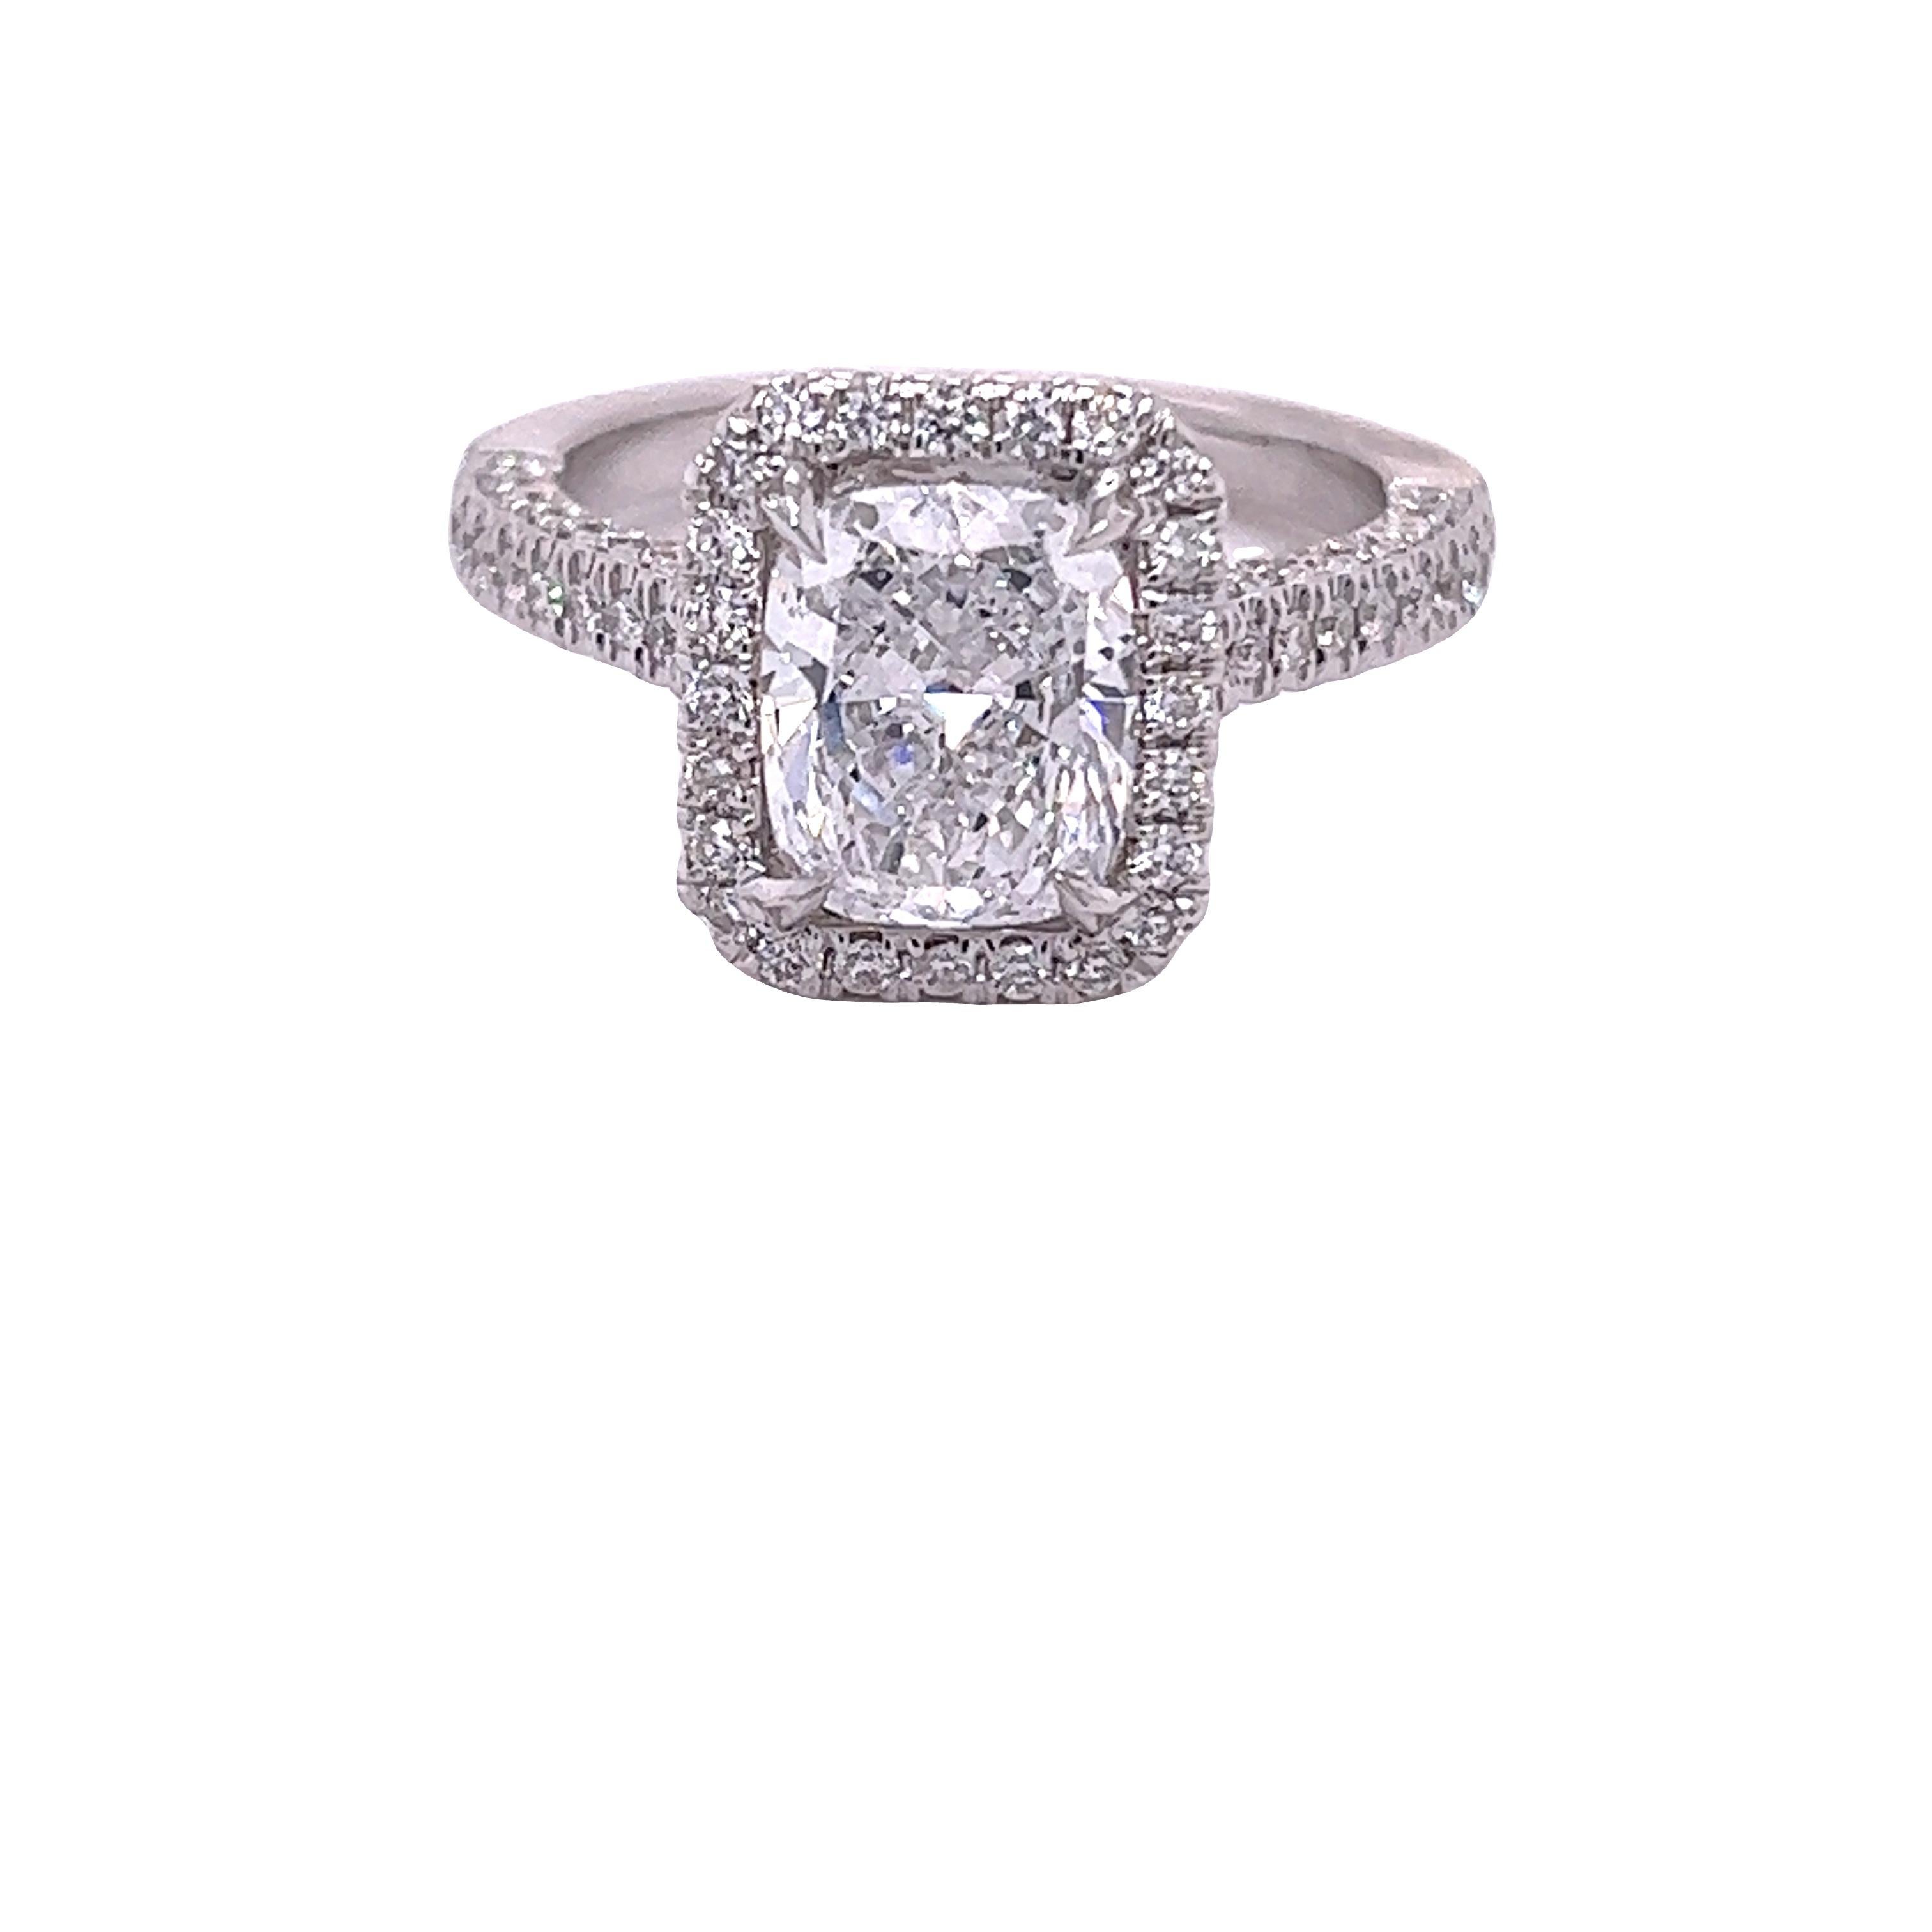 Rosenberg Diamonds & Co. 2.04 carat Cushion Cut D color SI2 clarity is accompanied by a GIA certificate. This exceptional SI2 elongated Cushion is full of brilliance and is set in a handmade 18 karat white gold setting. This ring completes its